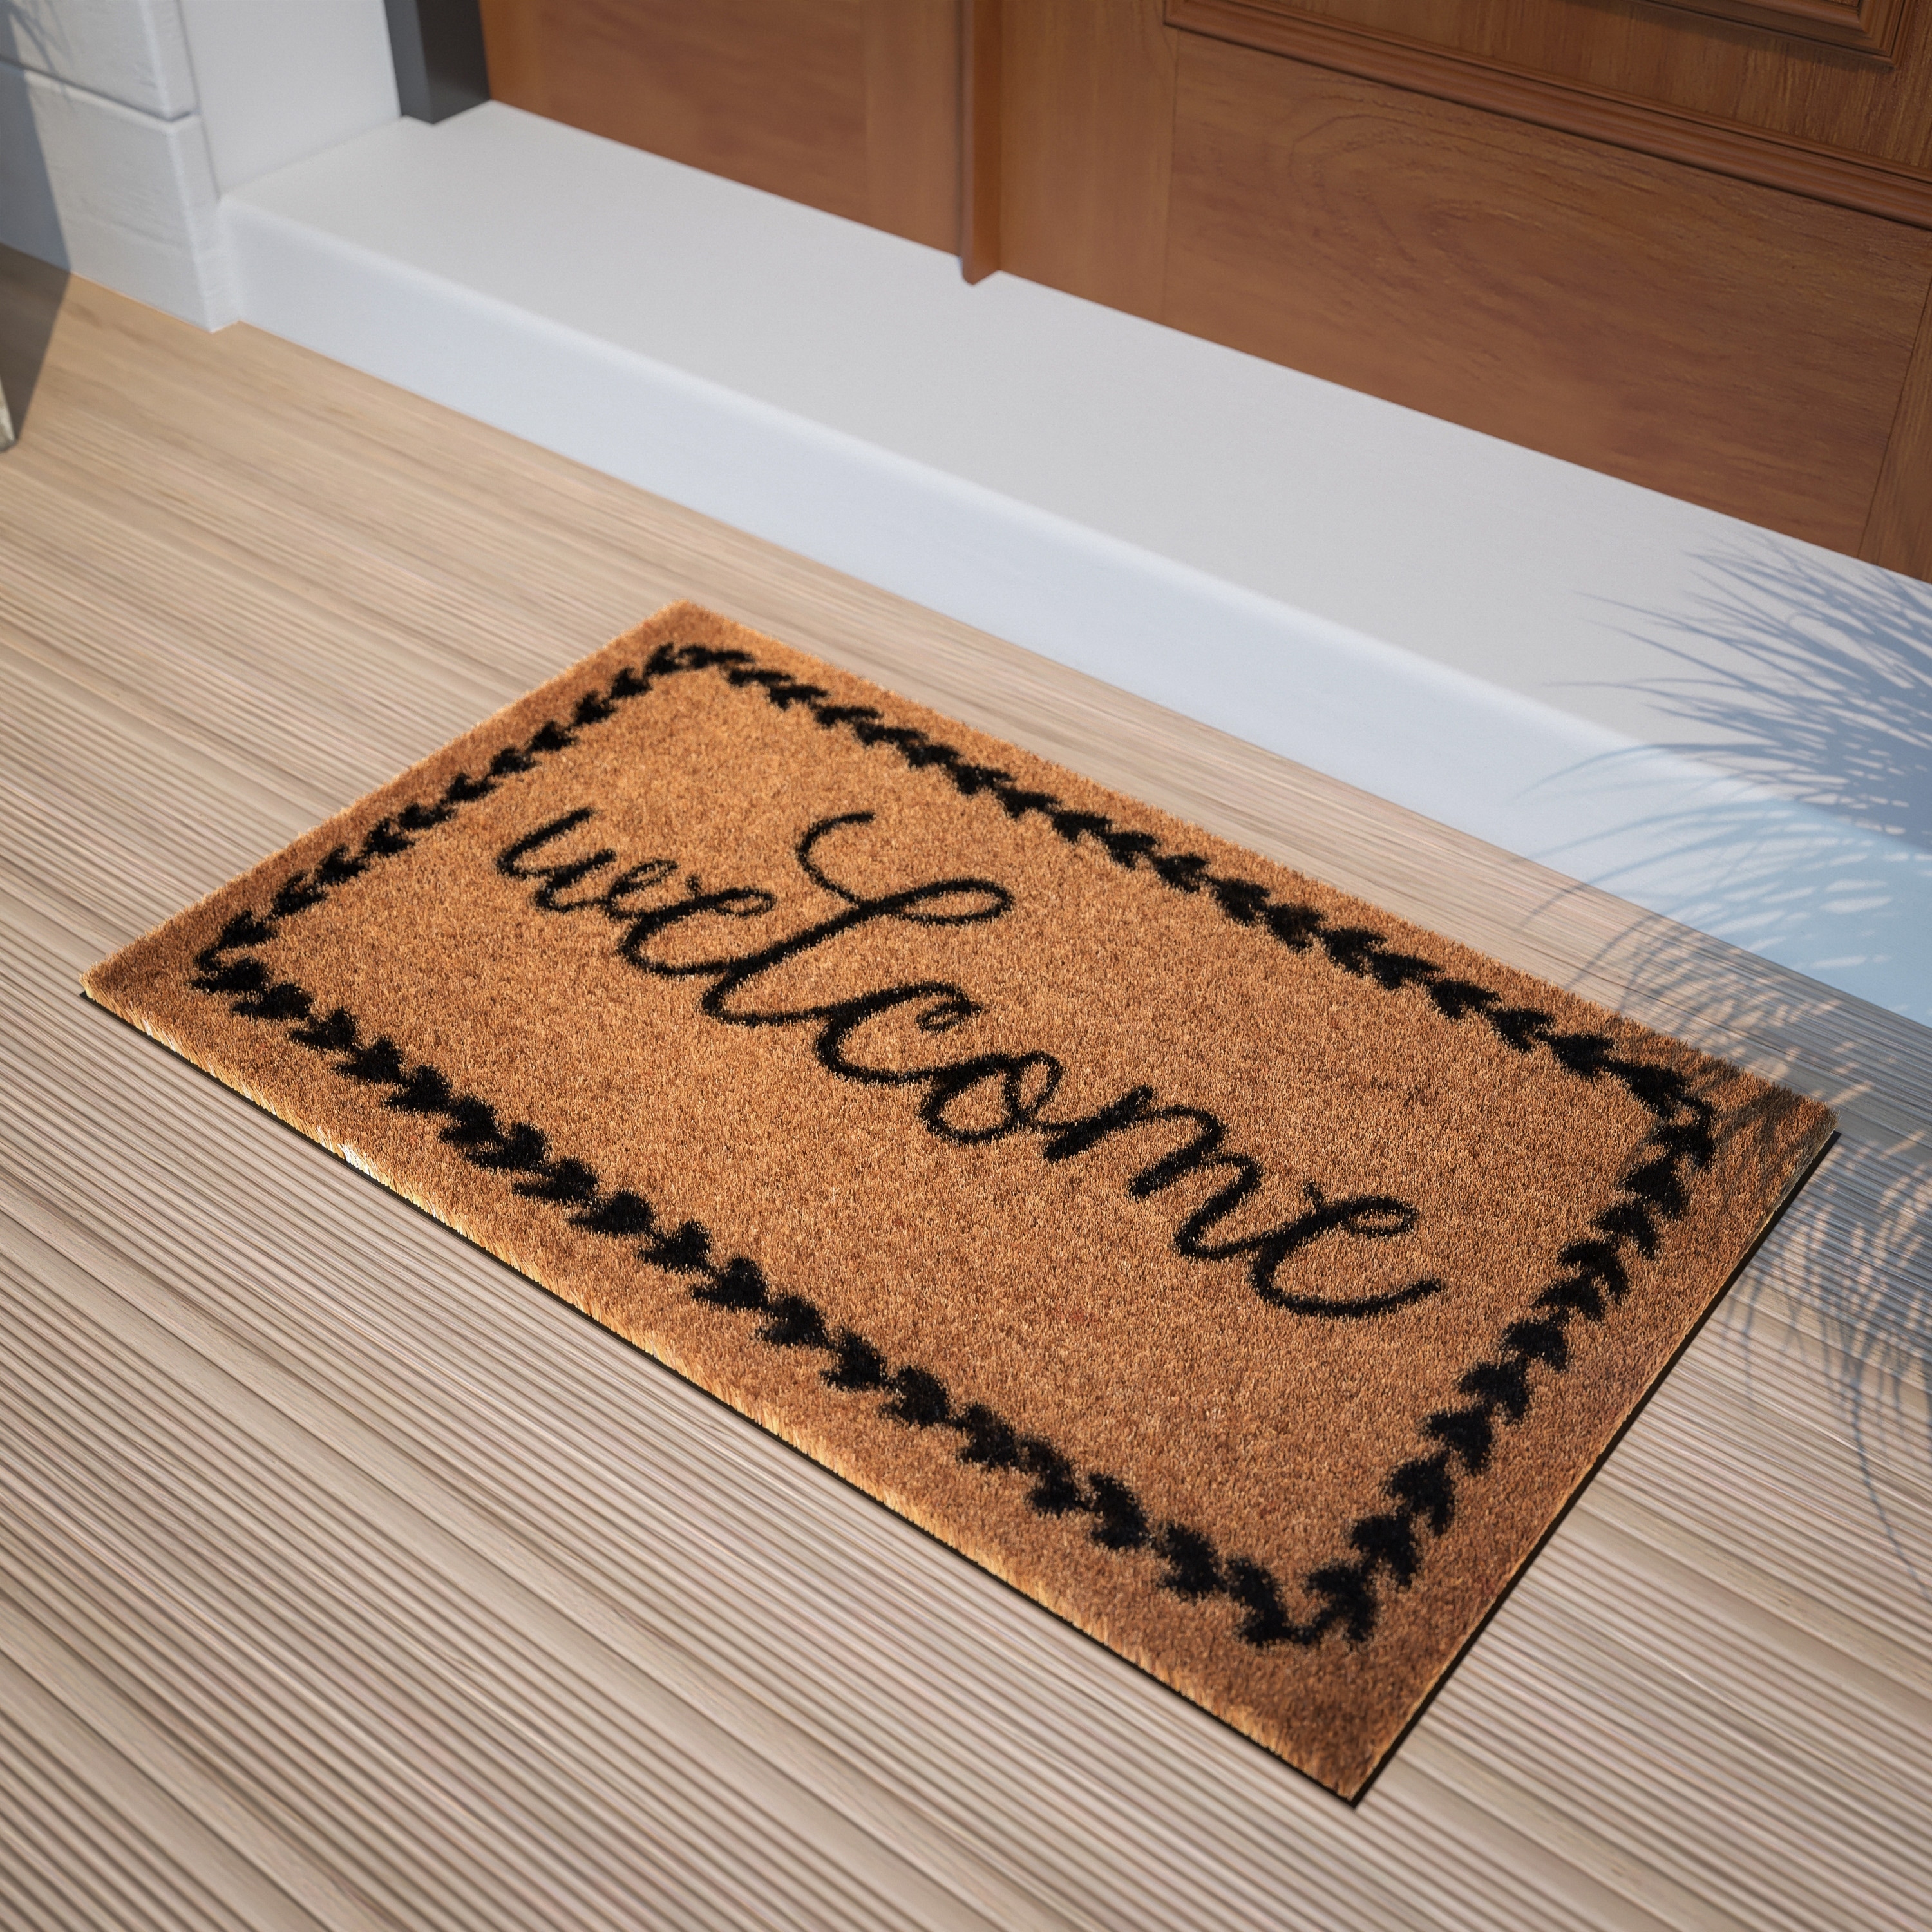 https://ak1.ostkcdn.com/images/products/is/images/direct/72876cc481a544e411170df8ad47b57e06bf2aea/Indoor-Outdoor-Coir-Doormat-with-Welcome-Message-and-Non-Slip-Back.jpg